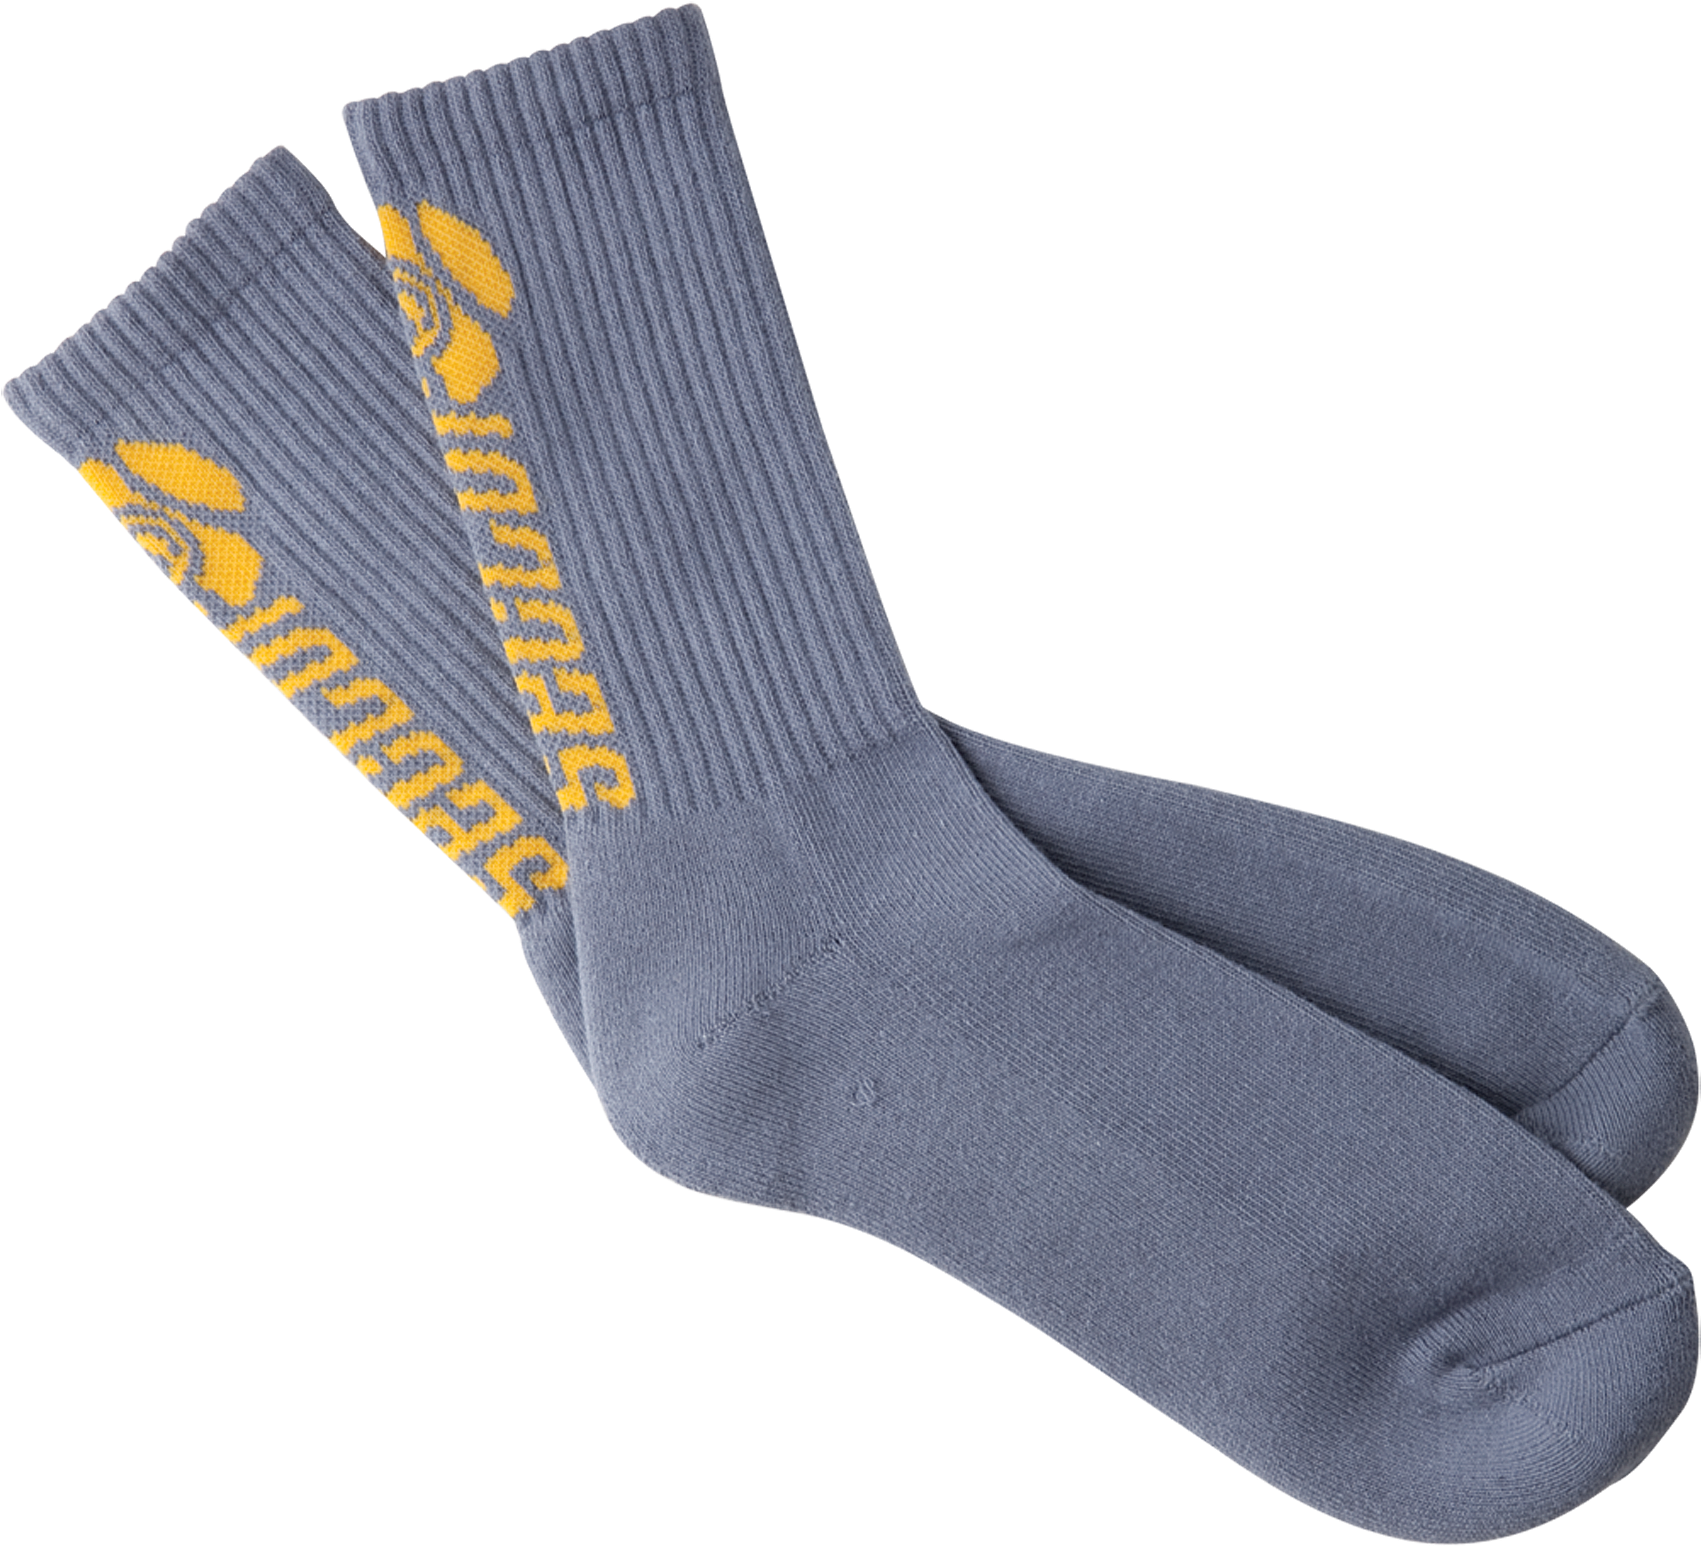 A Pair Of Grey Socks With Yellow Design